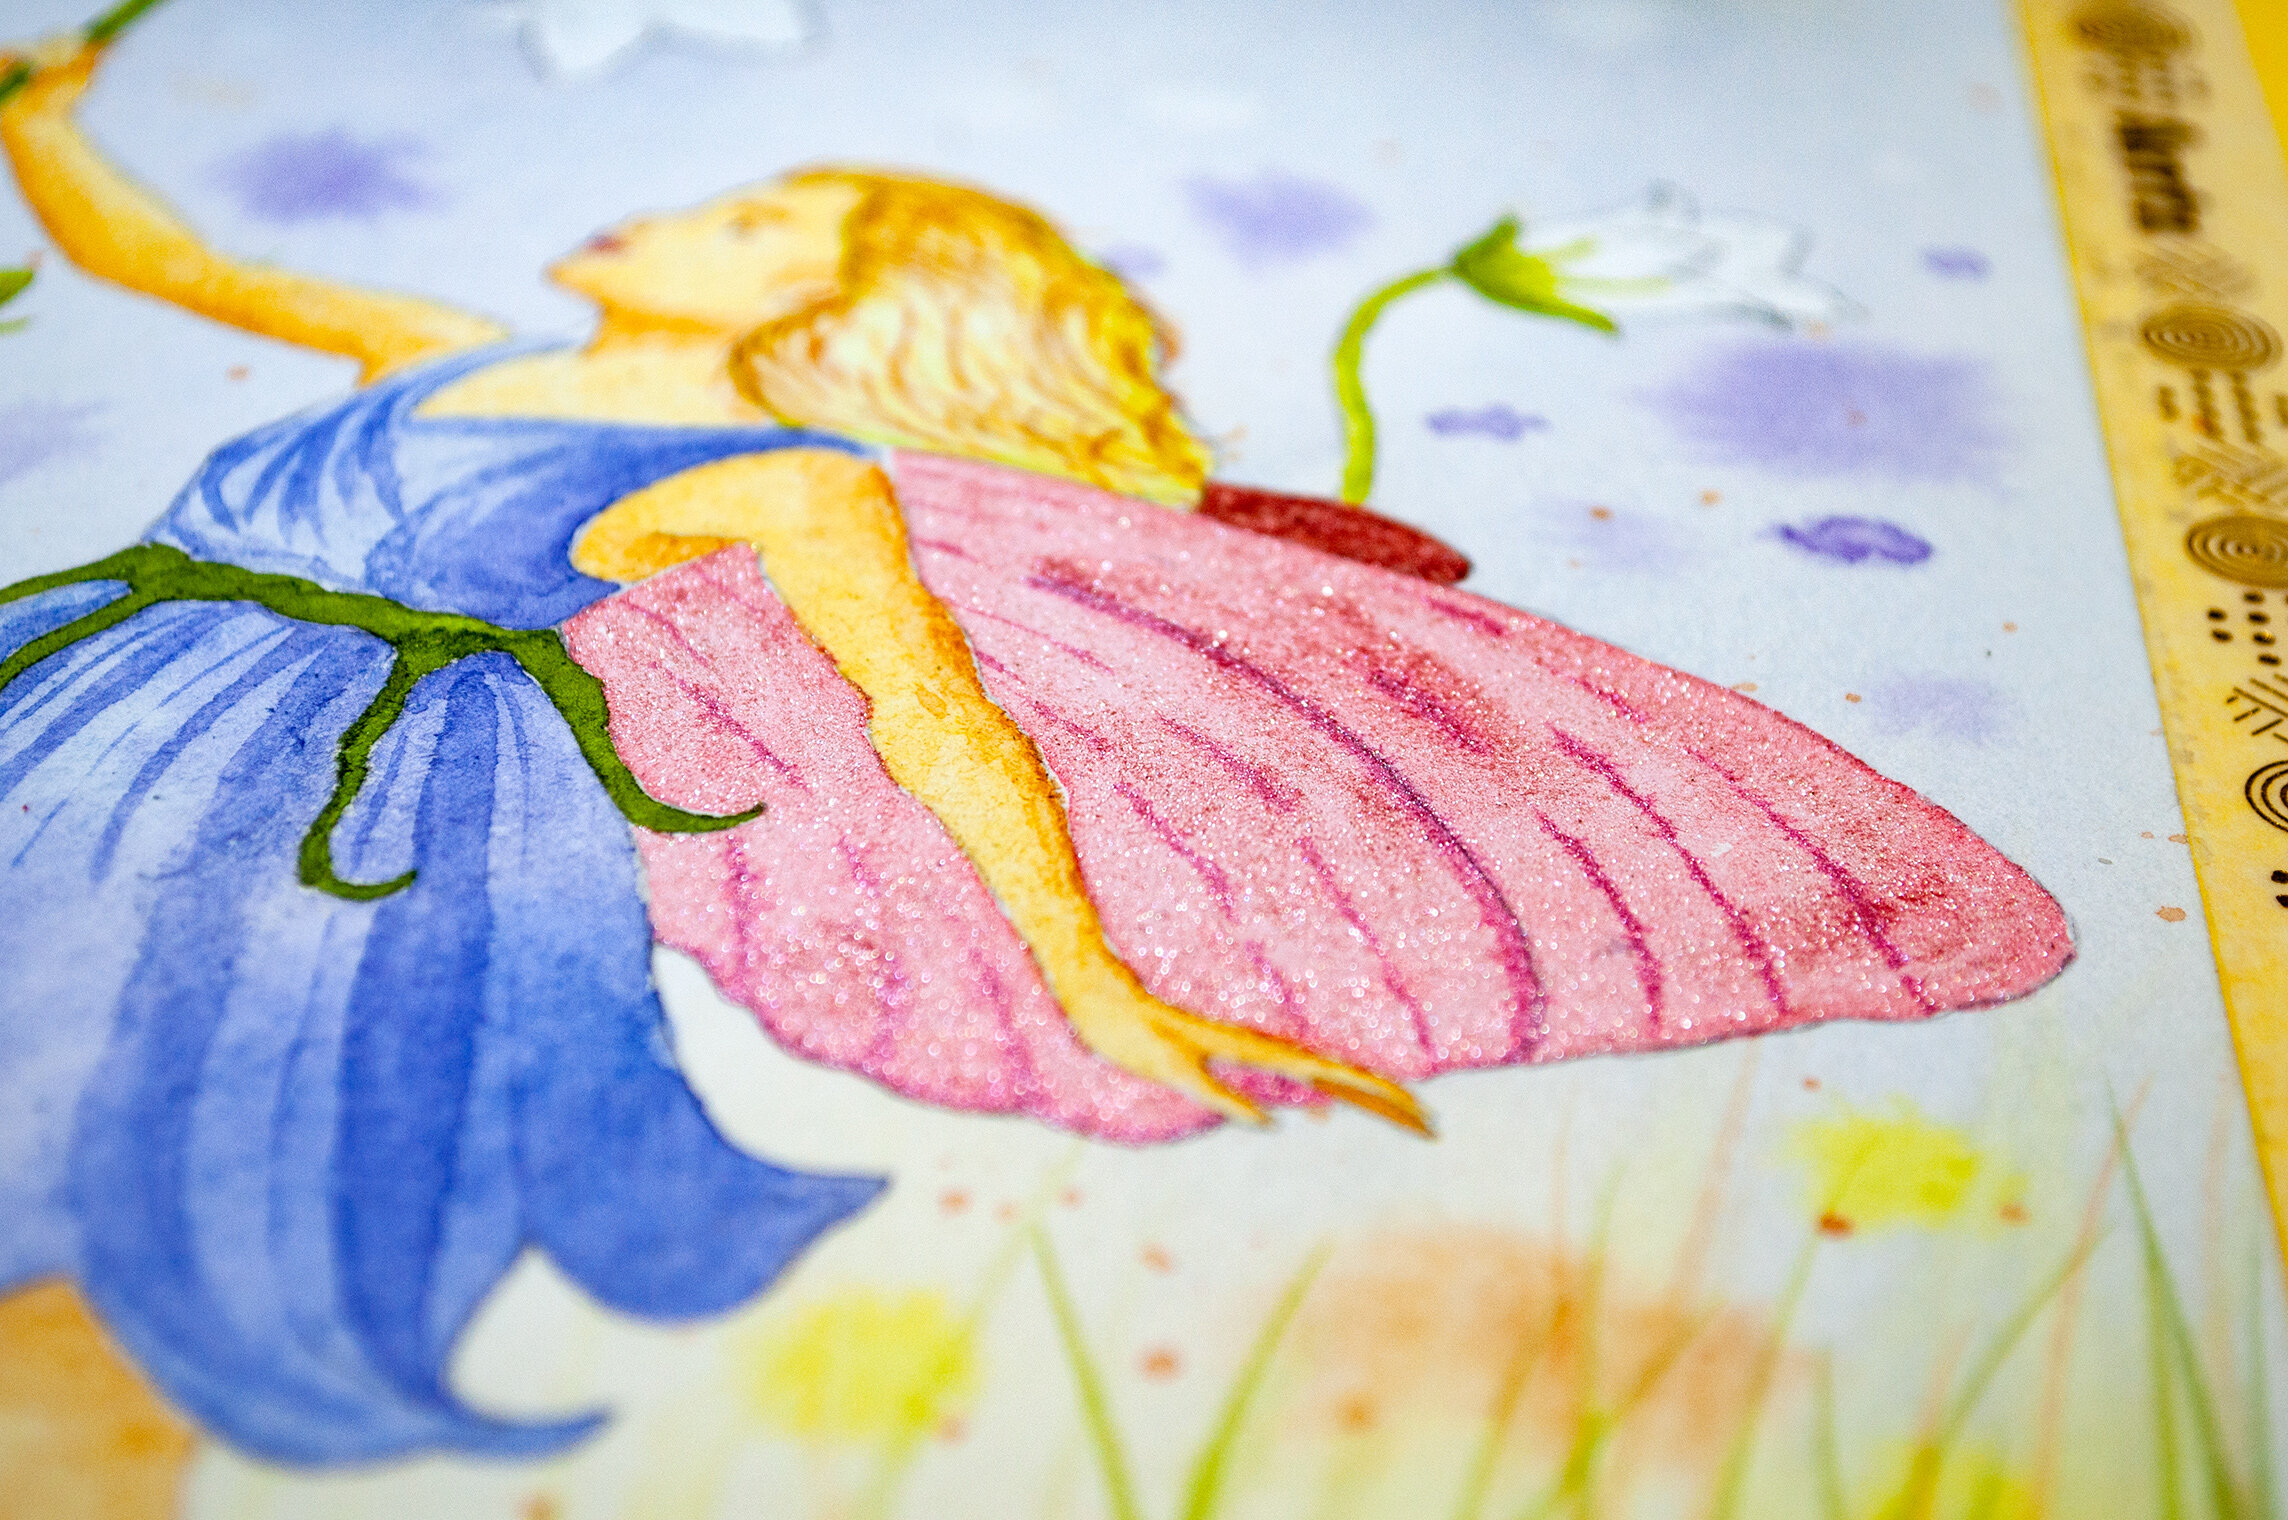 Love Them or Hate Them? Paul Rubens Watercolors Review - The